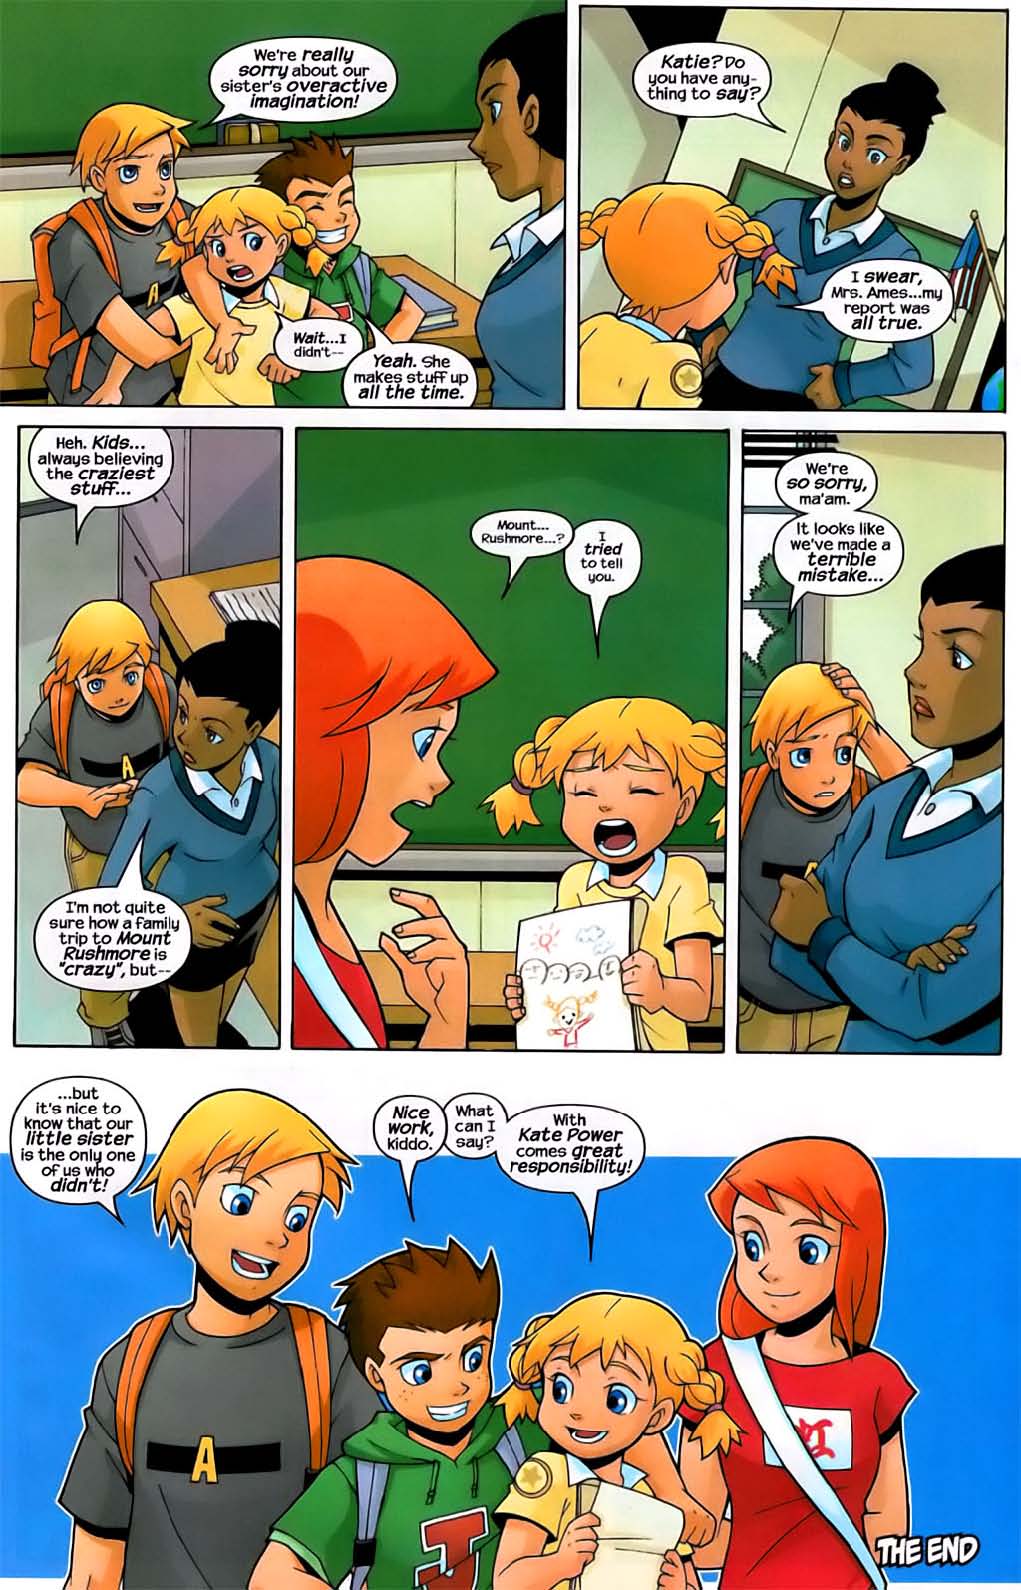 Power Pack 2005 Issue 1 Read Power Pack 2005 Issue 1 Comic Online In 